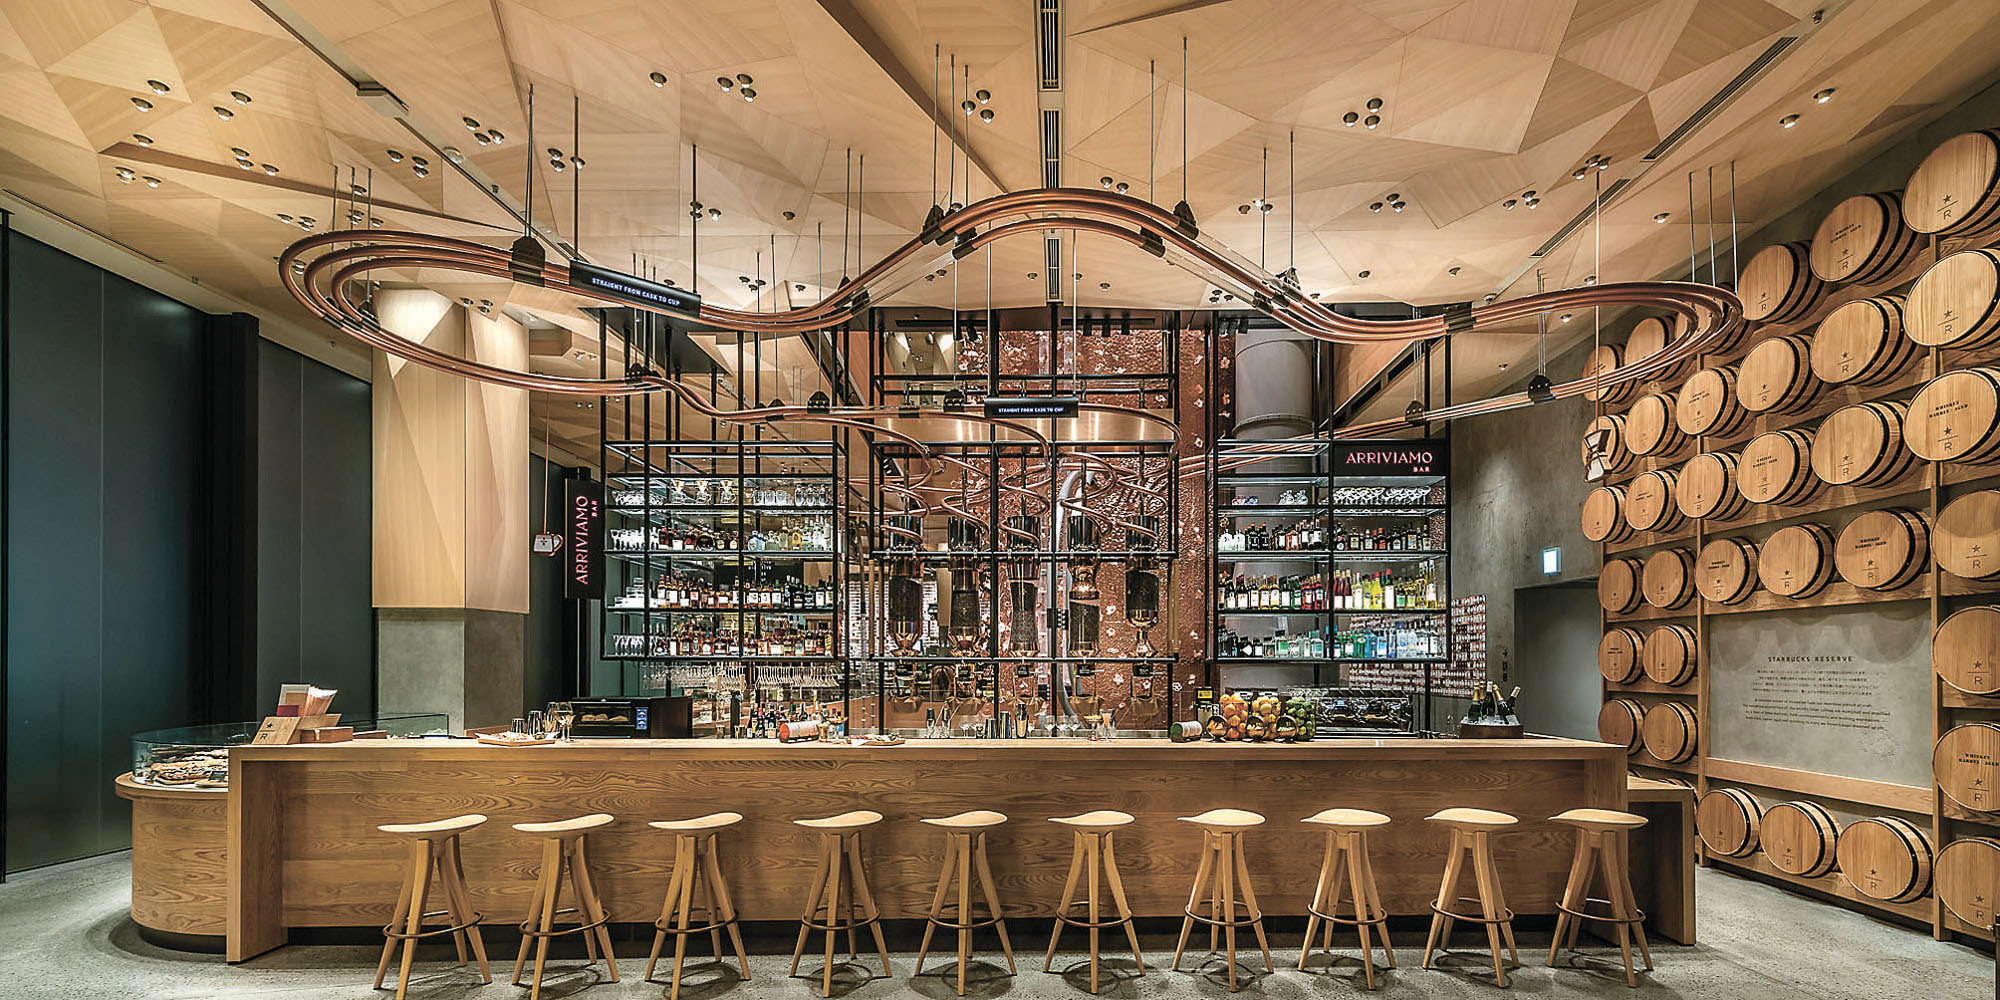 More than coffee: The Reserve Roastery Tokyo's third-floor Arriviamo bar serves coffee and tea-infused cocktails. | COURTESY OF STARBUCKS